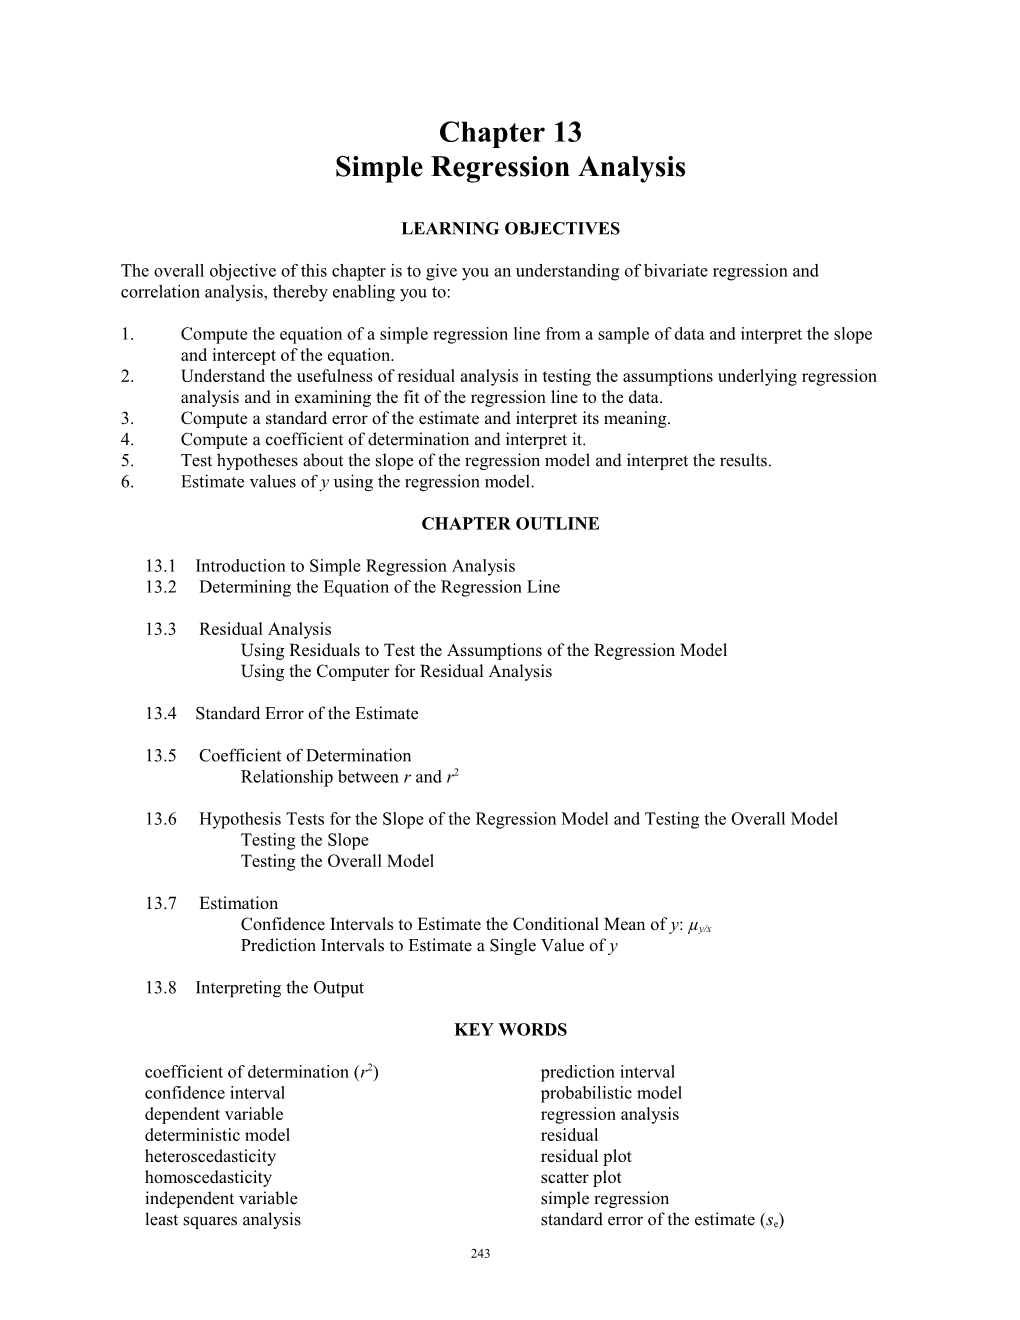 Chapter 13: Simple Regression Analysis 247